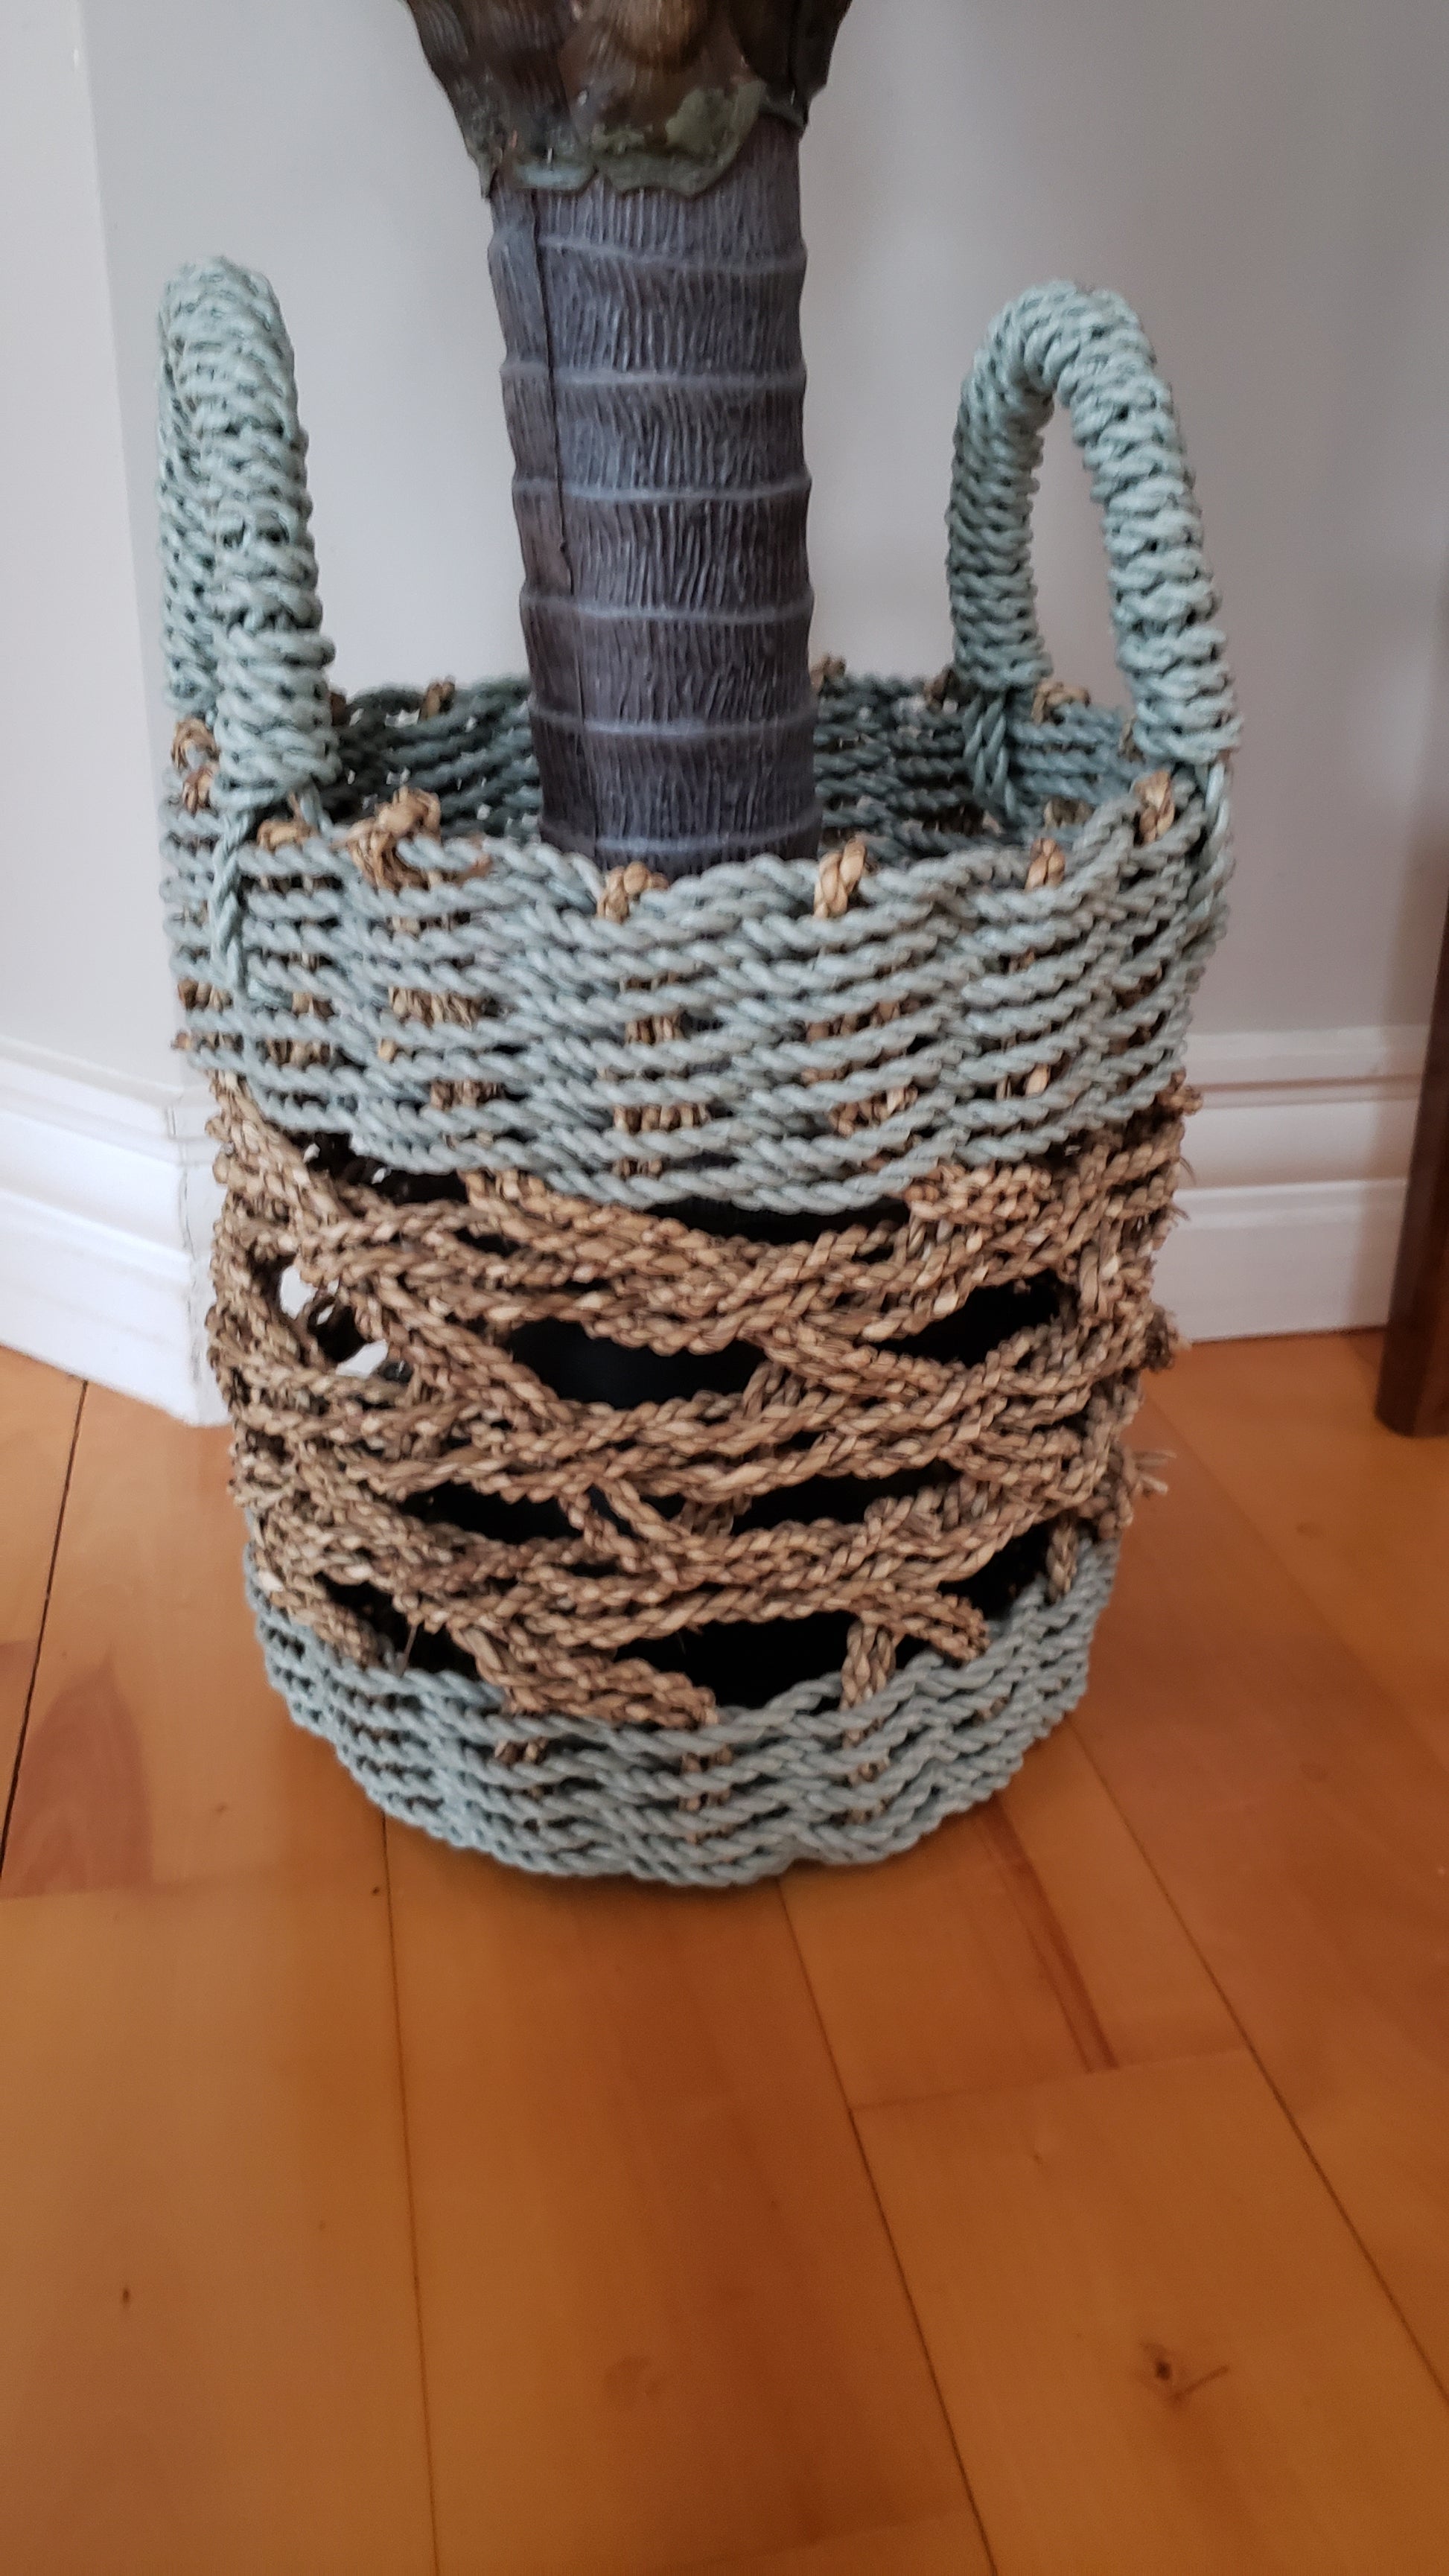 buy a rope basket at auction